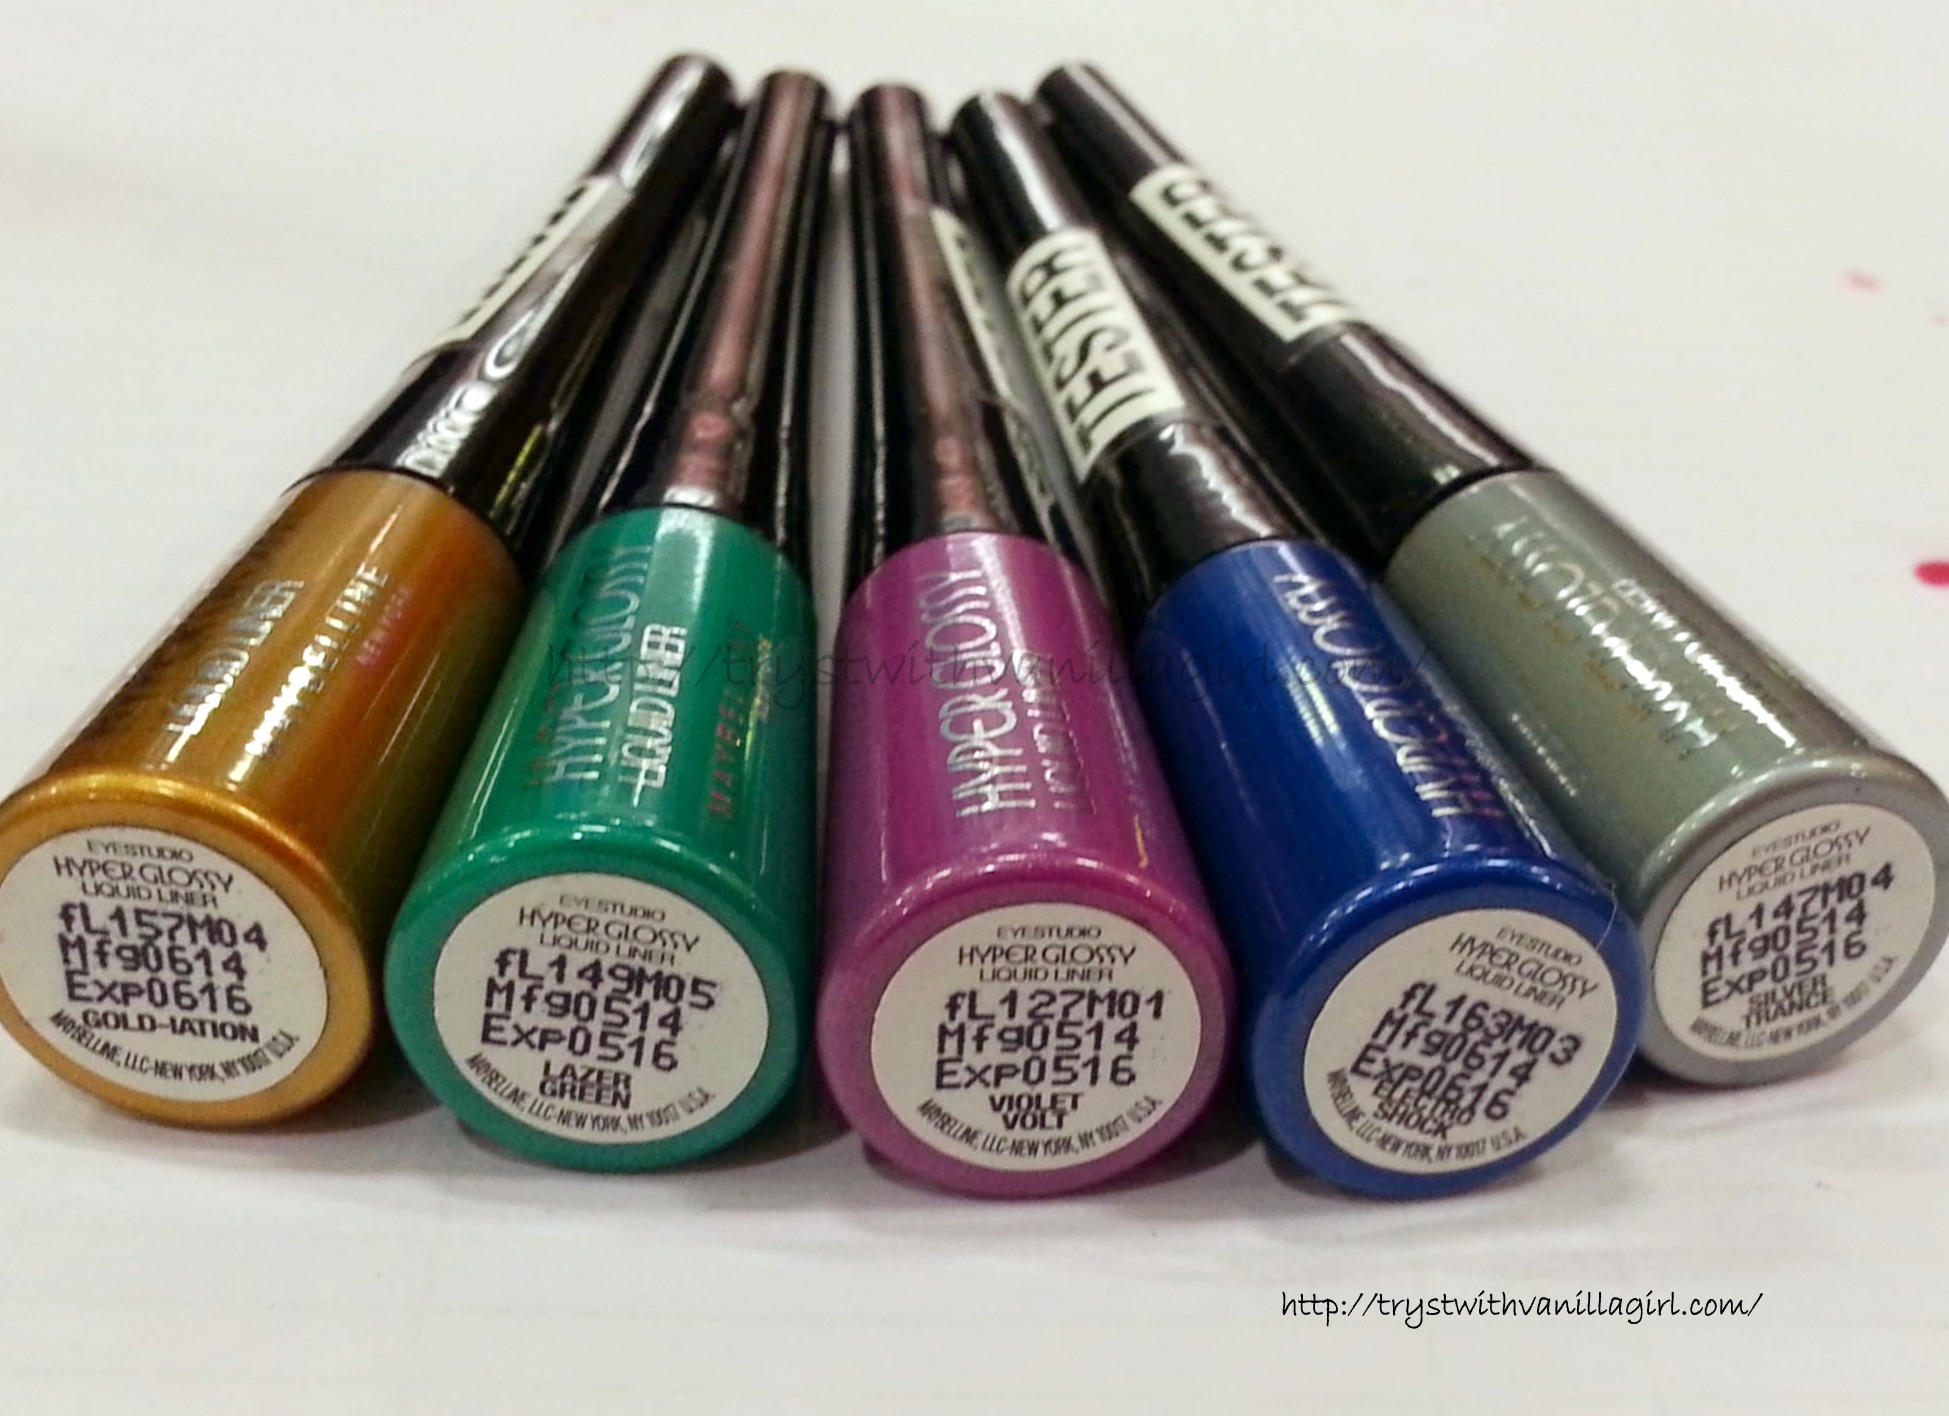 MAYBELLINE HYPERGLOSSY ELECTRICS EYELINERS SWATCHES